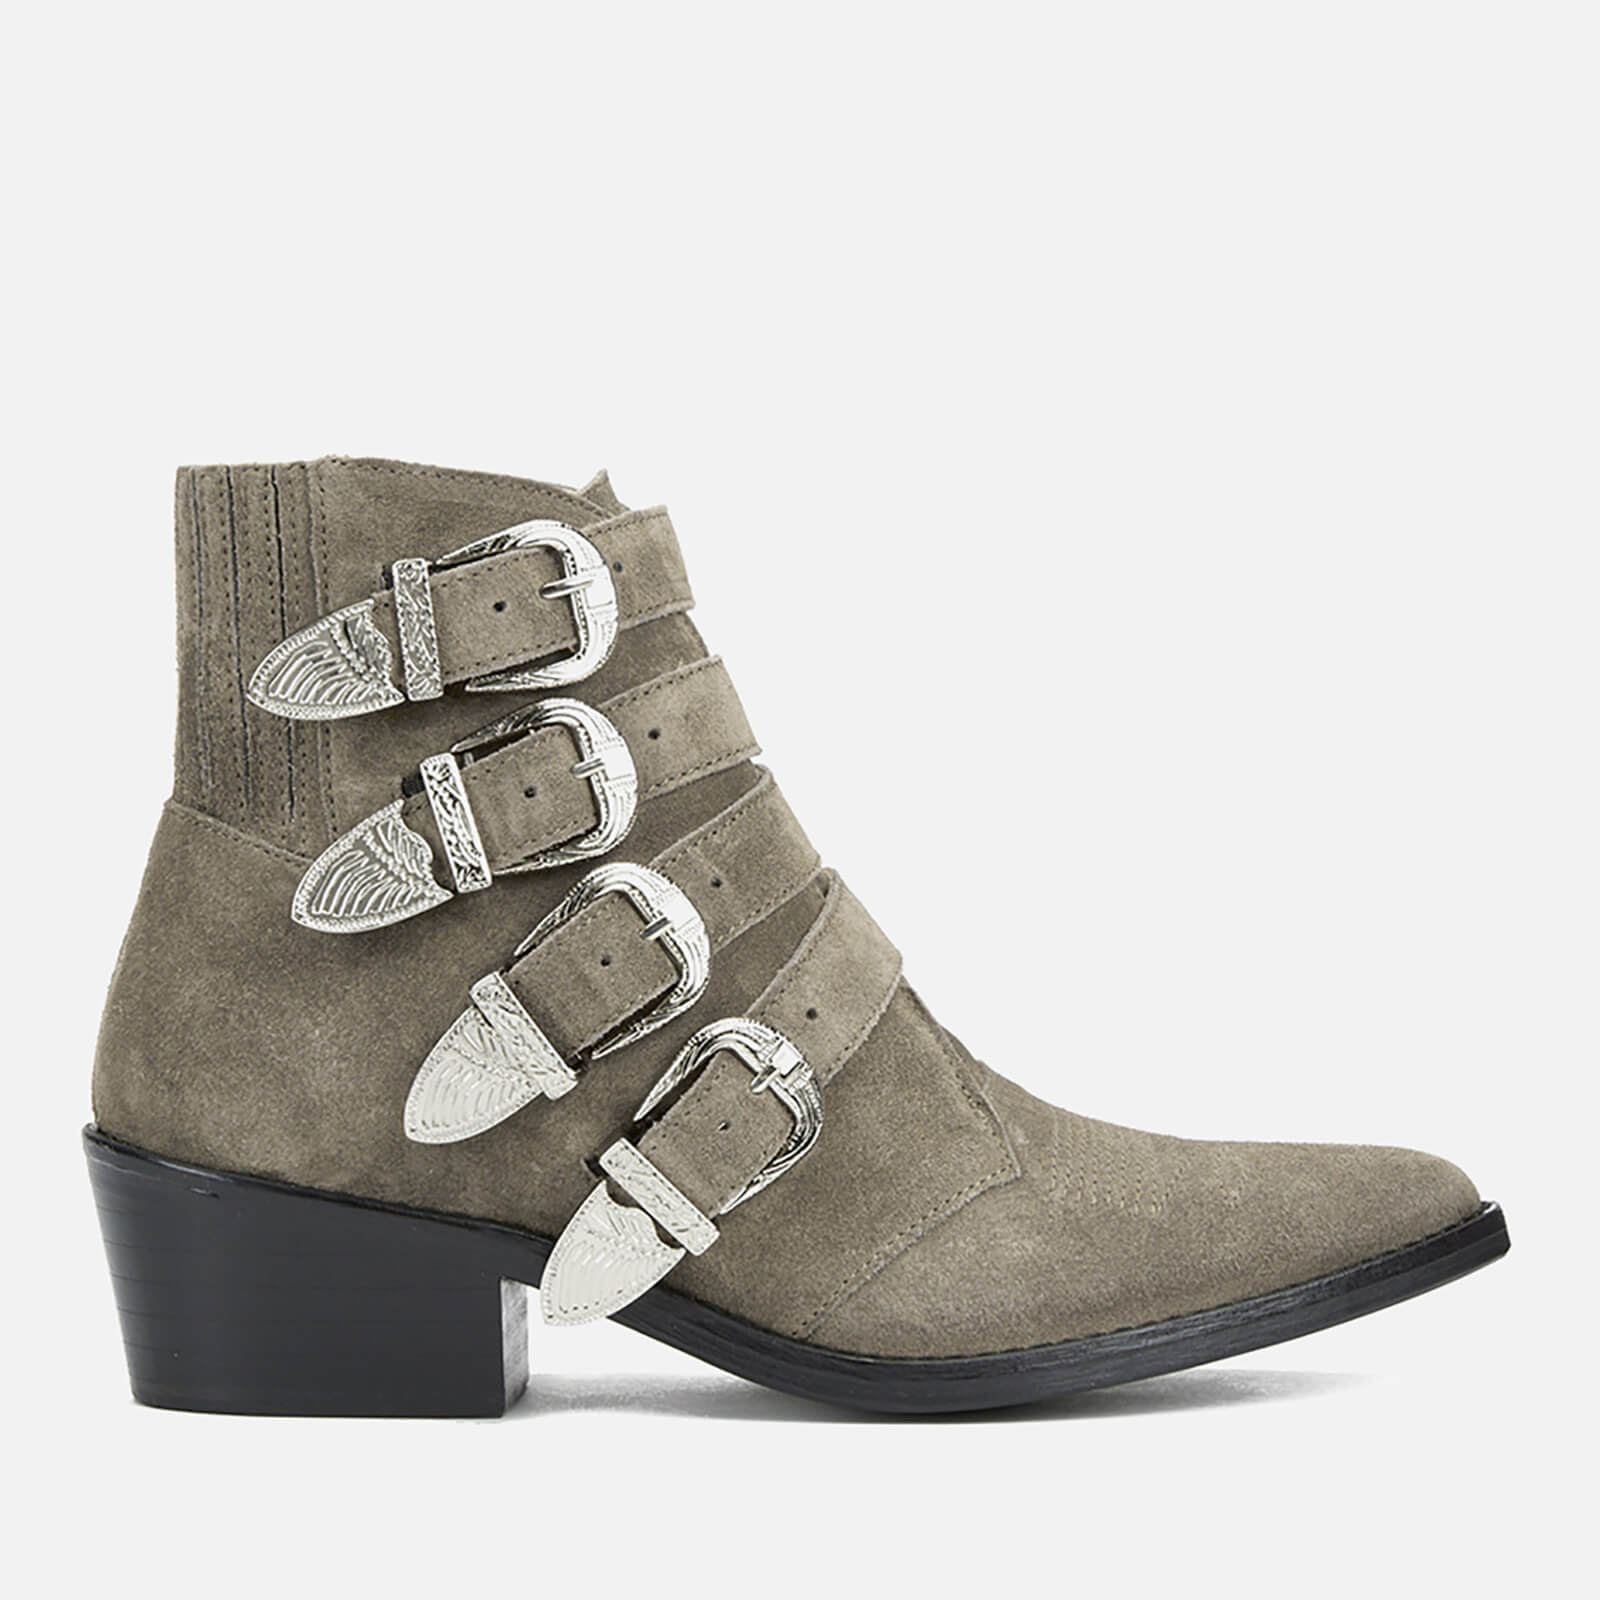 toga pulla suede boots